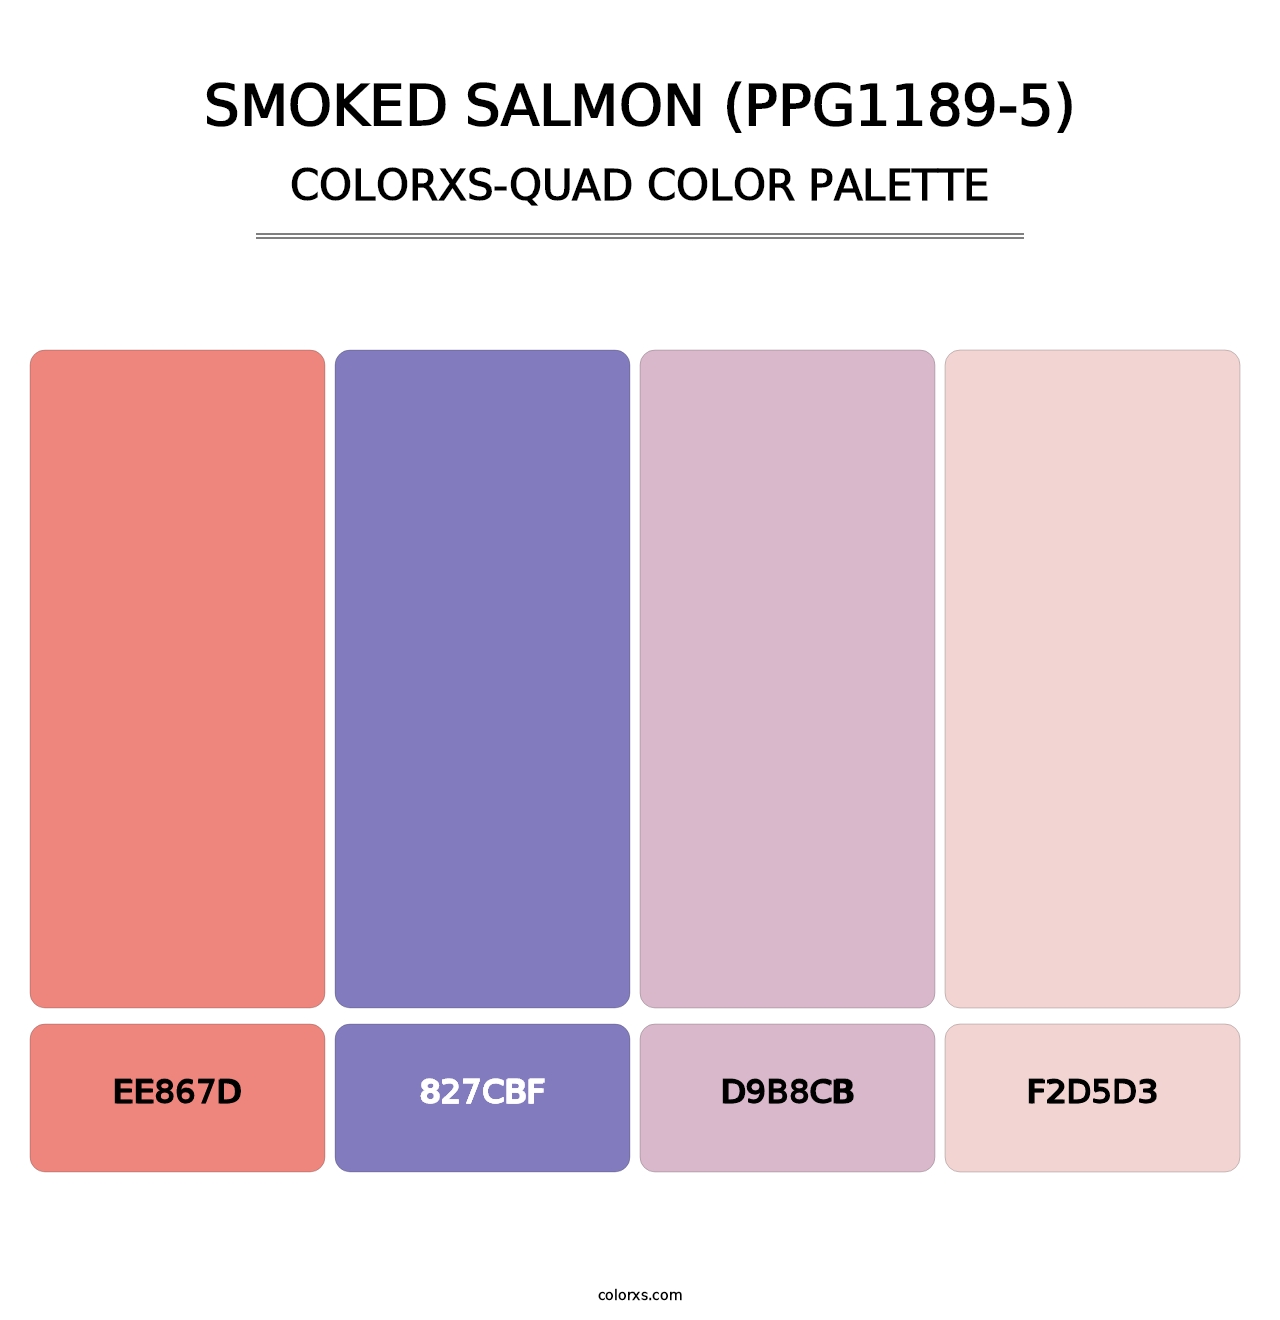 Smoked Salmon (PPG1189-5) - Colorxs Quad Palette